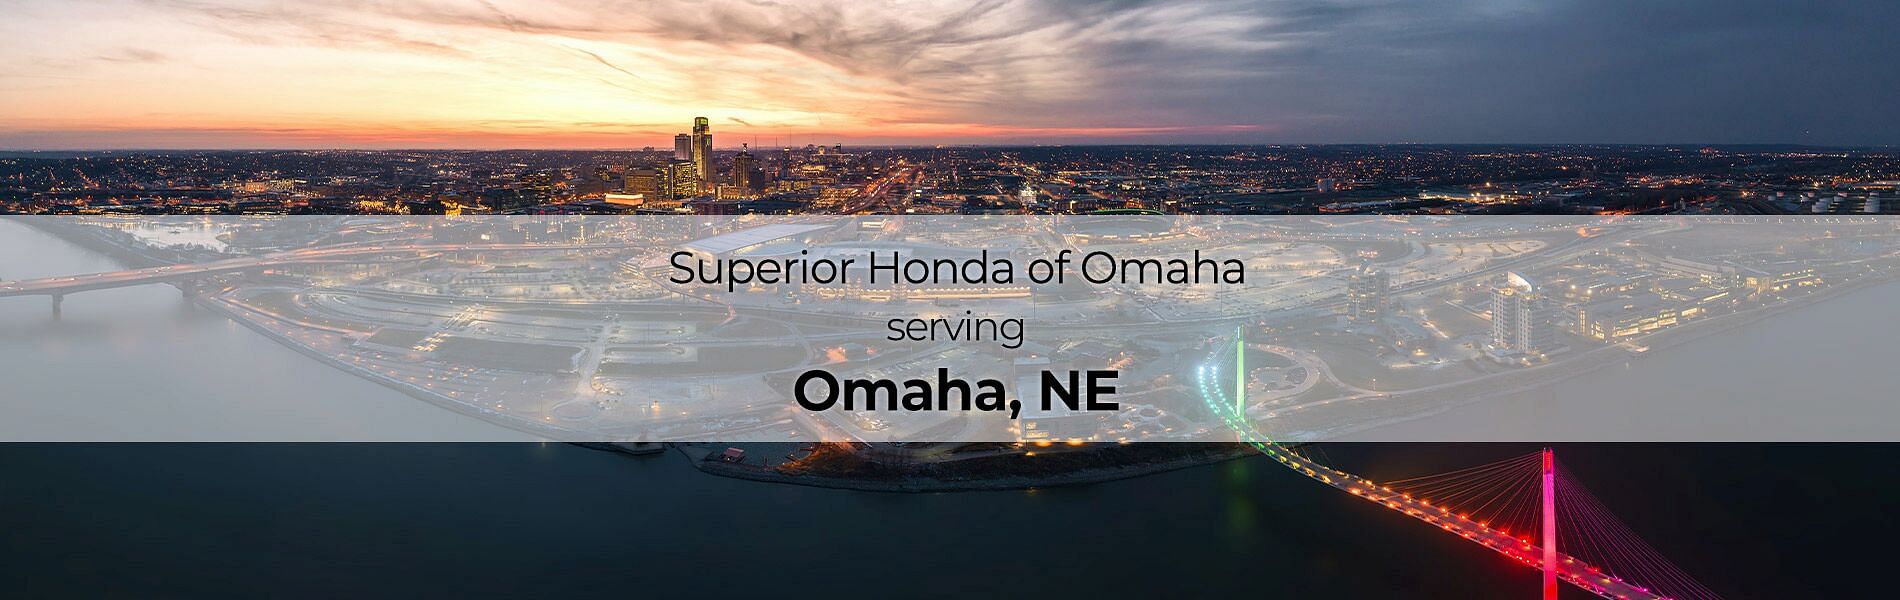 City in the background with text on the front: Superior Honda of Omaha serving Omaha, NE